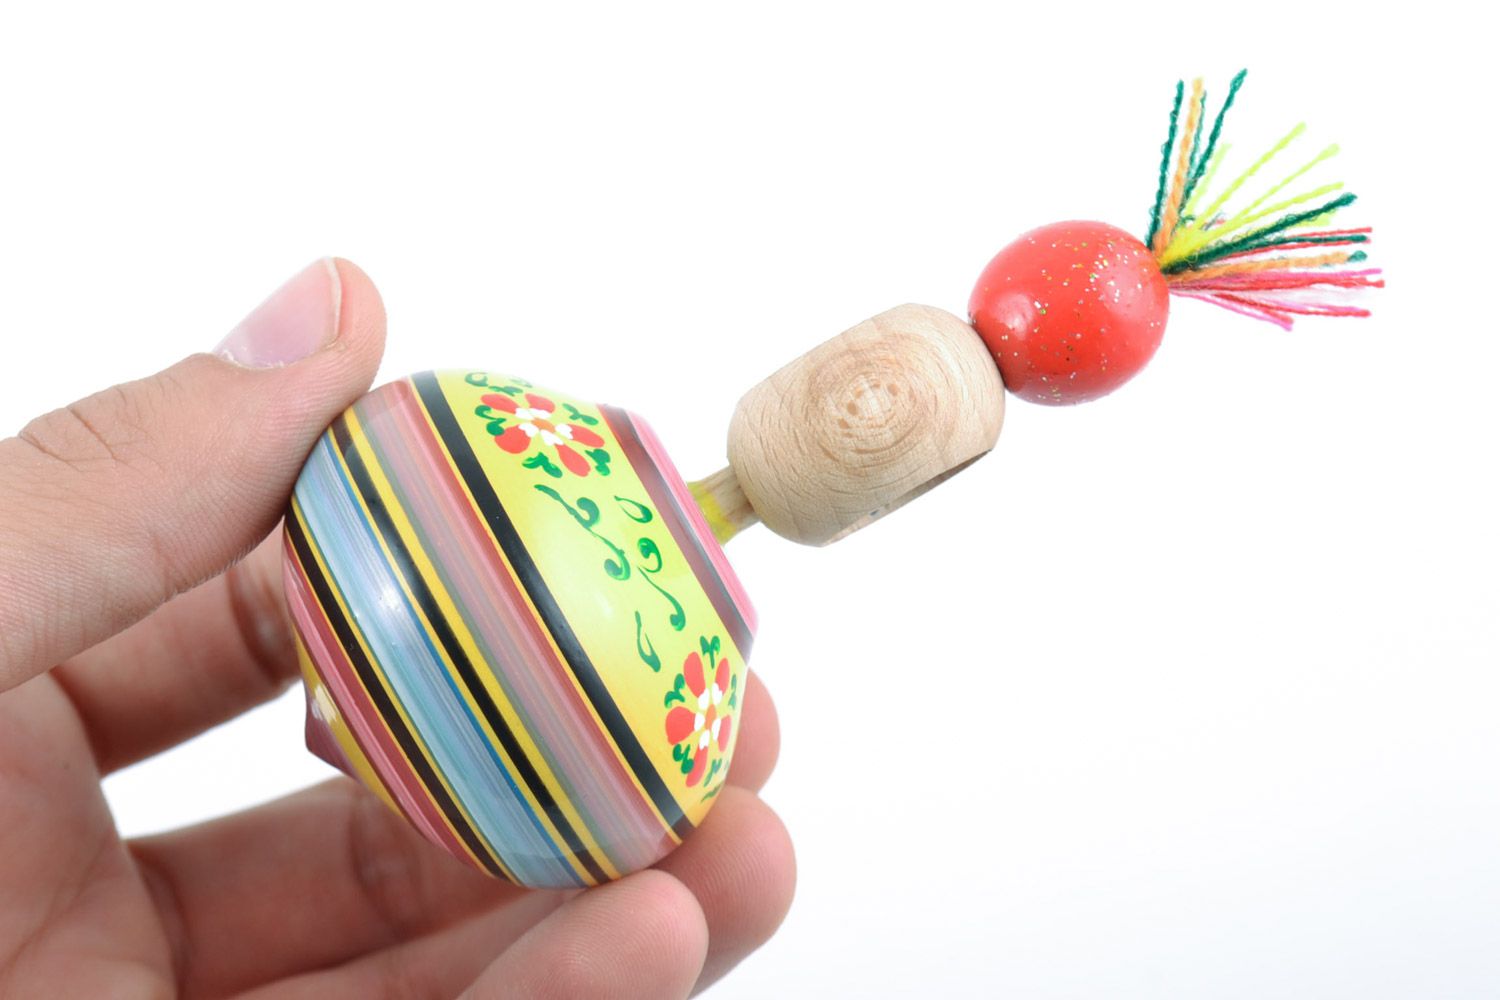 Homemade eco friendly wooden toy spinning top painted with ornaments for kids photo 2